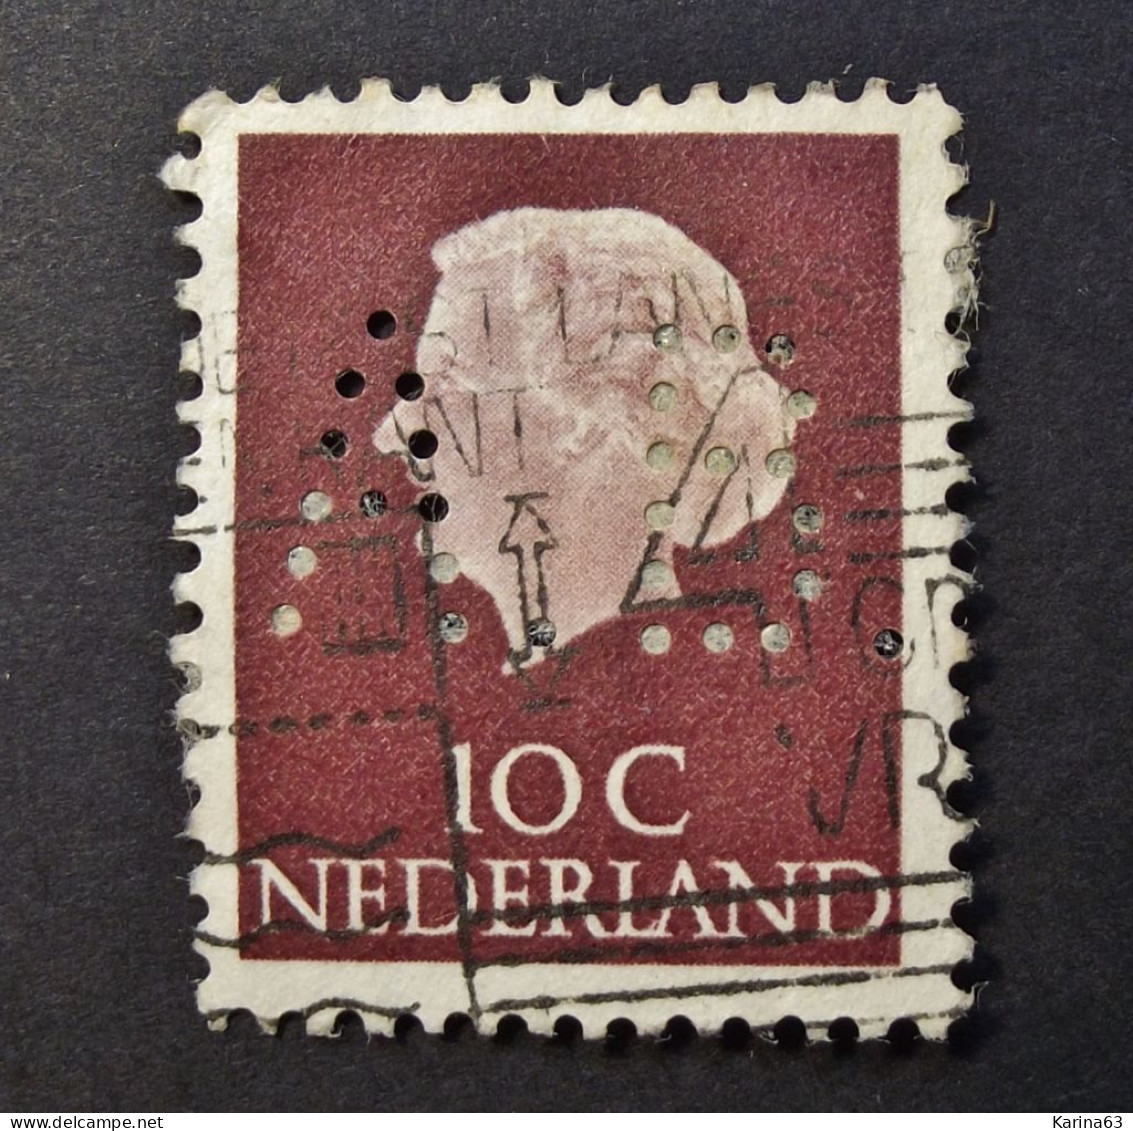 Nederland - Pays-Bas - Juliana -  Perfin - Lochung -  A.B. -  N.V.Chemicalienhandel V/h Firma A.Bisschop Pzoon Cancelled - Perforés